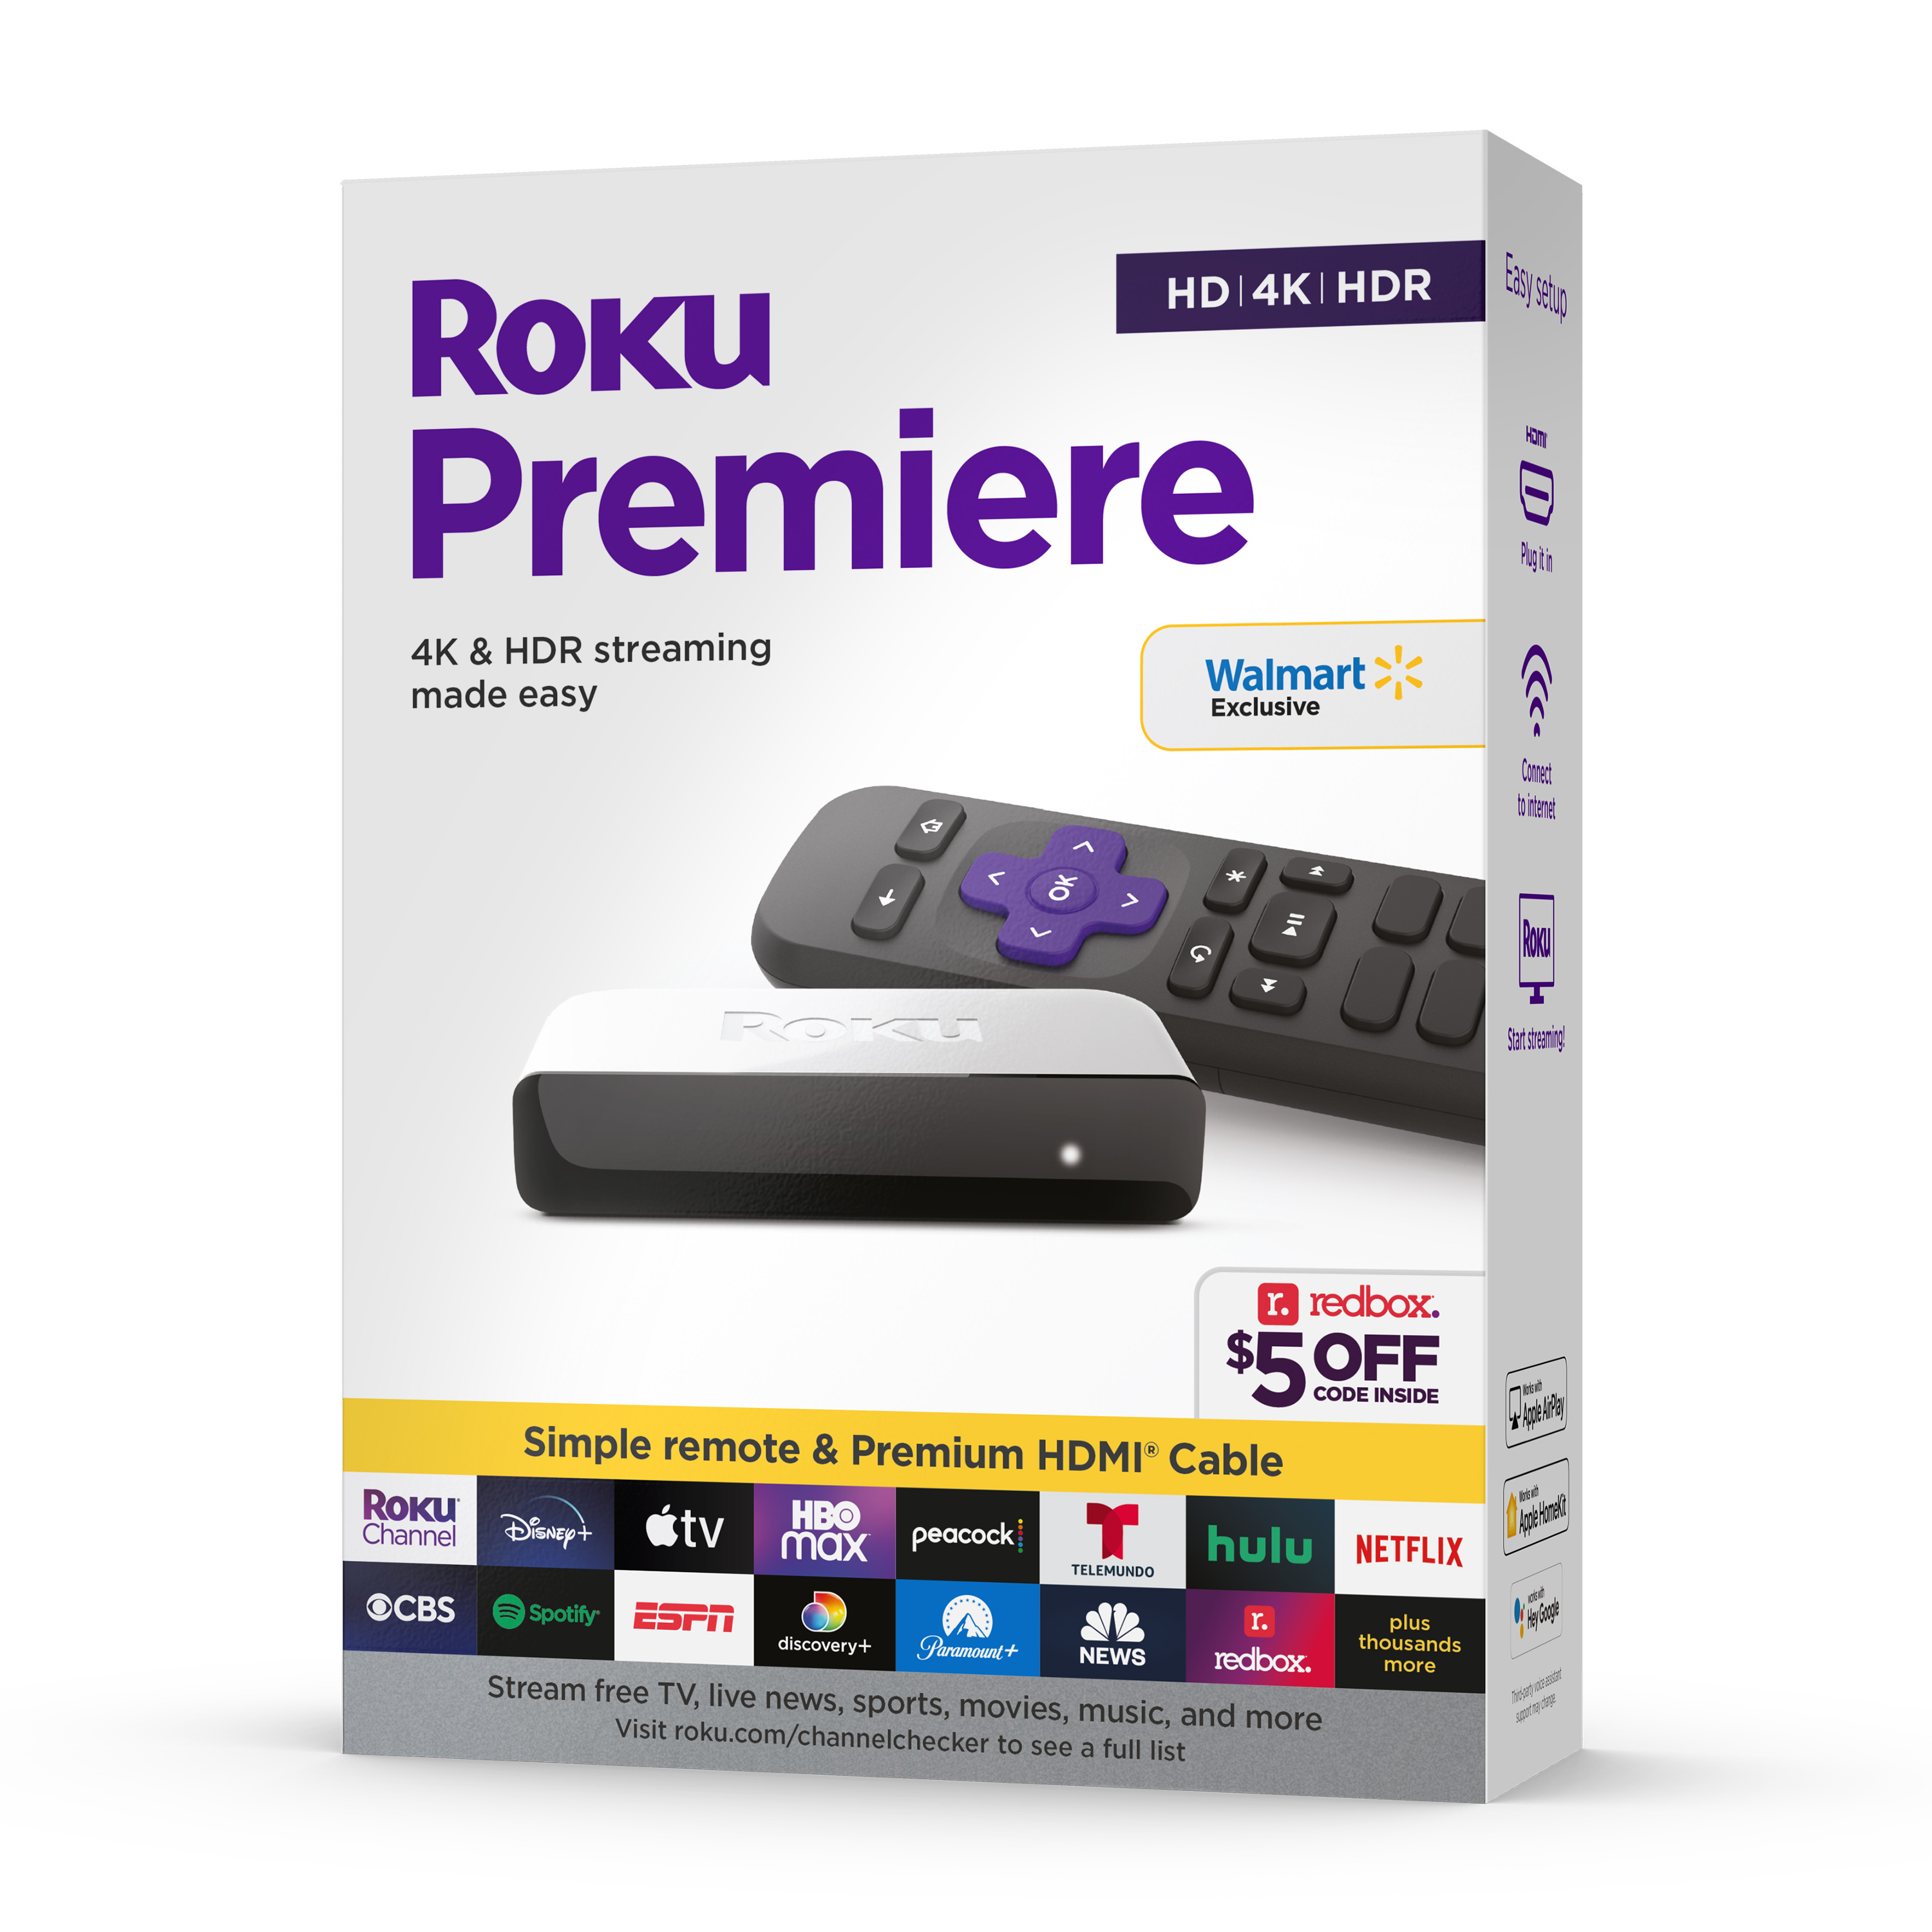 Roku Premiere | 4K/HDR Streaming Media Player with Premium High Speed HDMI Cable and Simple Remote - image 1 of 11